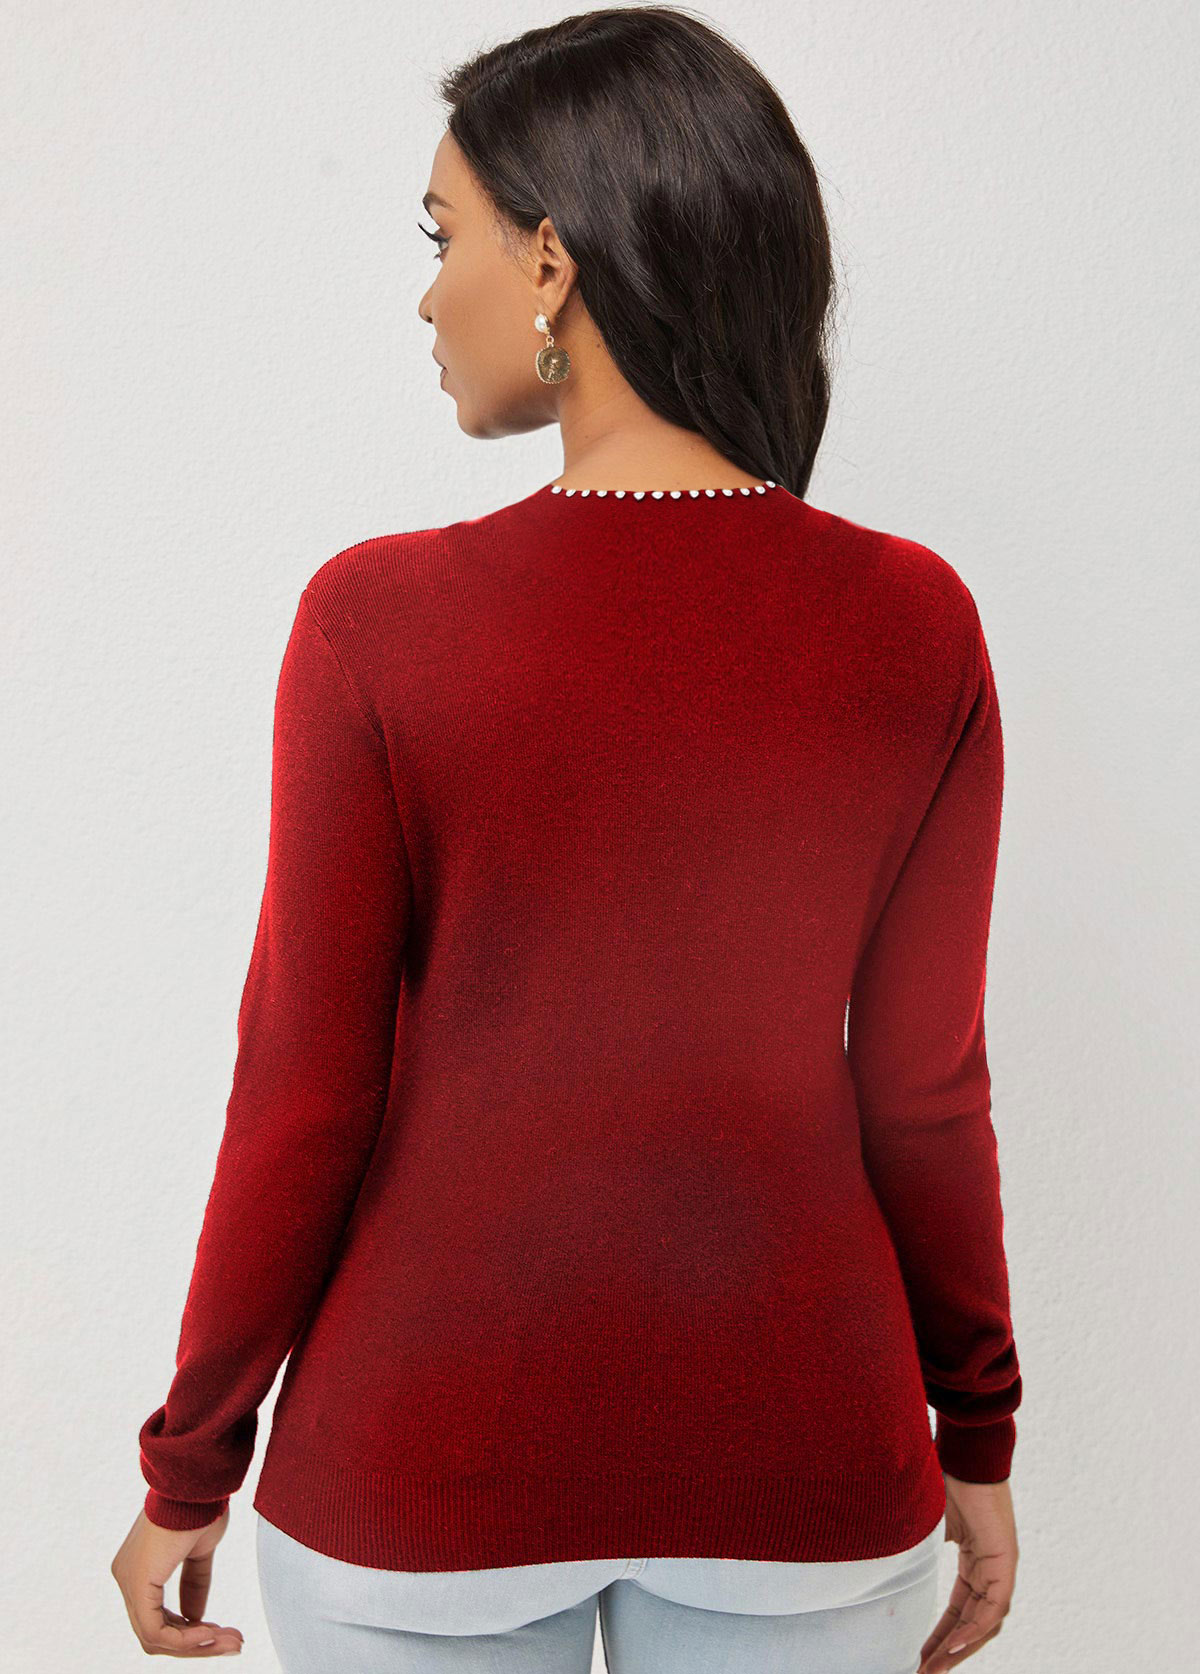 Pearl Detail Keyhole Neckline Wine Red Sweater